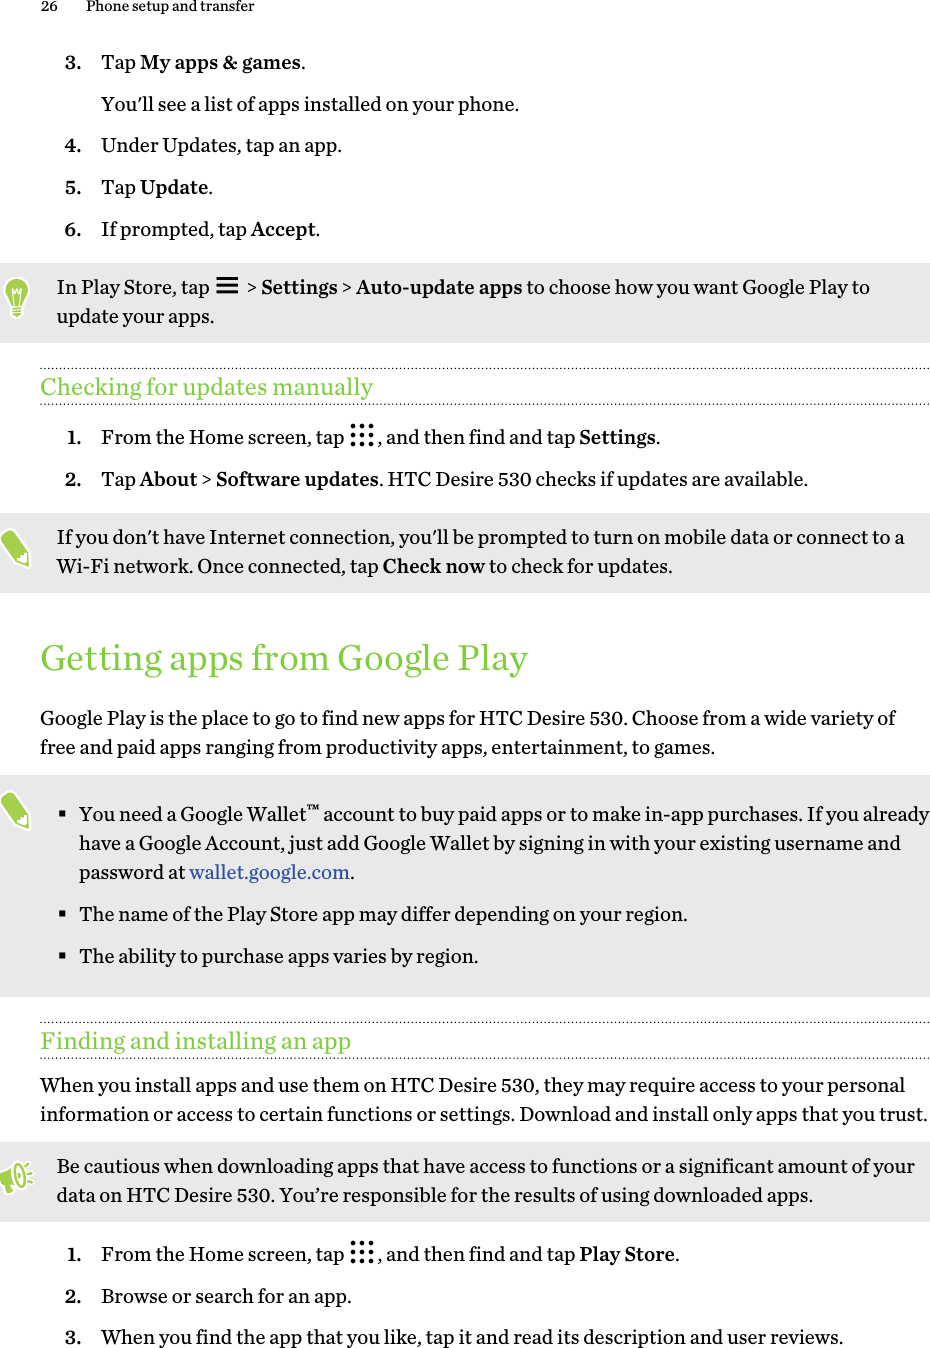 3. Tap My apps &amp; games. You&apos;ll see a list of apps installed on your phone.4. Under Updates, tap an app.5. Tap Update.6. If prompted, tap Accept.In Play Store, tap   &gt; Settings &gt; Auto-update apps to choose how you want Google Play toupdate your apps.Checking for updates manually1. From the Home screen, tap  , and then find and tap Settings.2. Tap About &gt; Software updates. HTC Desire 530 checks if updates are available.If you don&apos;t have Internet connection, you&apos;ll be prompted to turn on mobile data or connect to aWi-Fi network. Once connected, tap Check now to check for updates.Getting apps from Google PlayGoogle Play is the place to go to find new apps for HTC Desire 530. Choose from a wide variety offree and paid apps ranging from productivity apps, entertainment, to games.§You need a Google Wallet™ account to buy paid apps or to make in-app purchases. If you alreadyhave a Google Account, just add Google Wallet by signing in with your existing username andpassword at wallet.google.com.§The name of the Play Store app may differ depending on your region.§The ability to purchase apps varies by region.Finding and installing an appWhen you install apps and use them on HTC Desire 530, they may require access to your personalinformation or access to certain functions or settings. Download and install only apps that you trust.Be cautious when downloading apps that have access to functions or a significant amount of yourdata on HTC Desire 530. You’re responsible for the results of using downloaded apps.1. From the Home screen, tap  , and then find and tap Play Store.2. Browse or search for an app.3. When you find the app that you like, tap it and read its description and user reviews.26 Phone setup and transfer